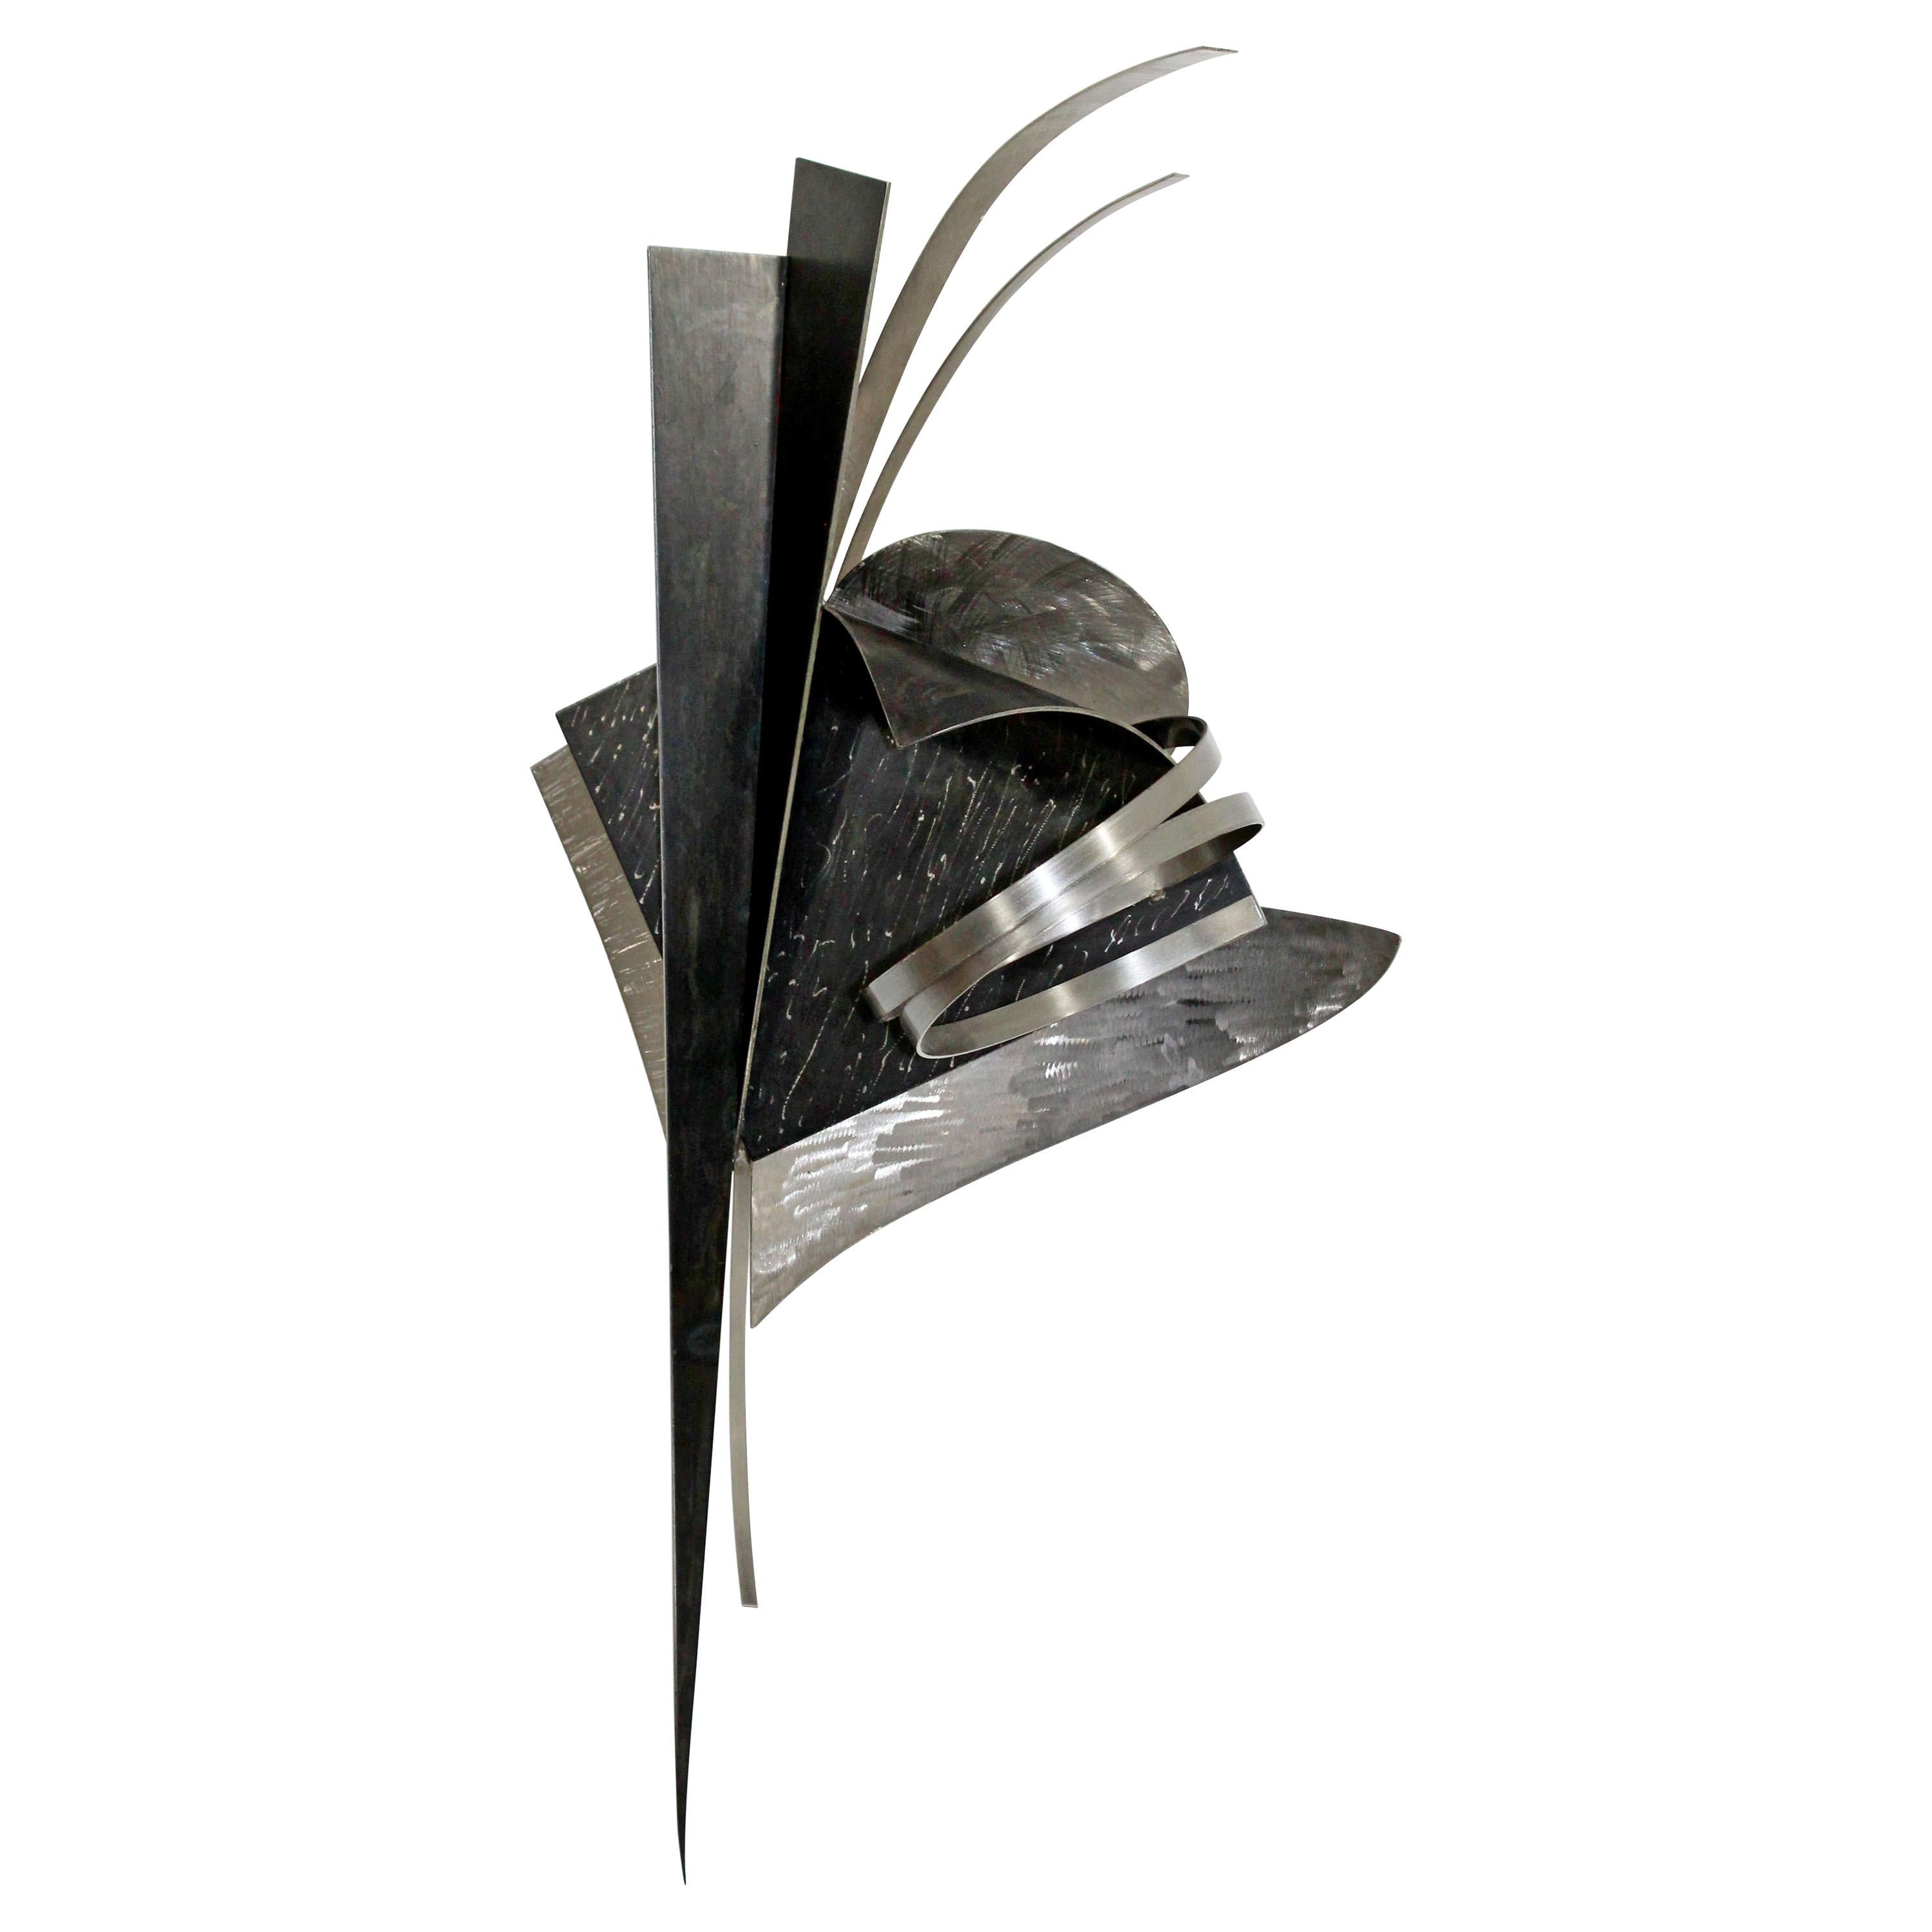 Contemporary Signed Steel Metal Wall Sculpture Signed Christiane Martens, 1990s